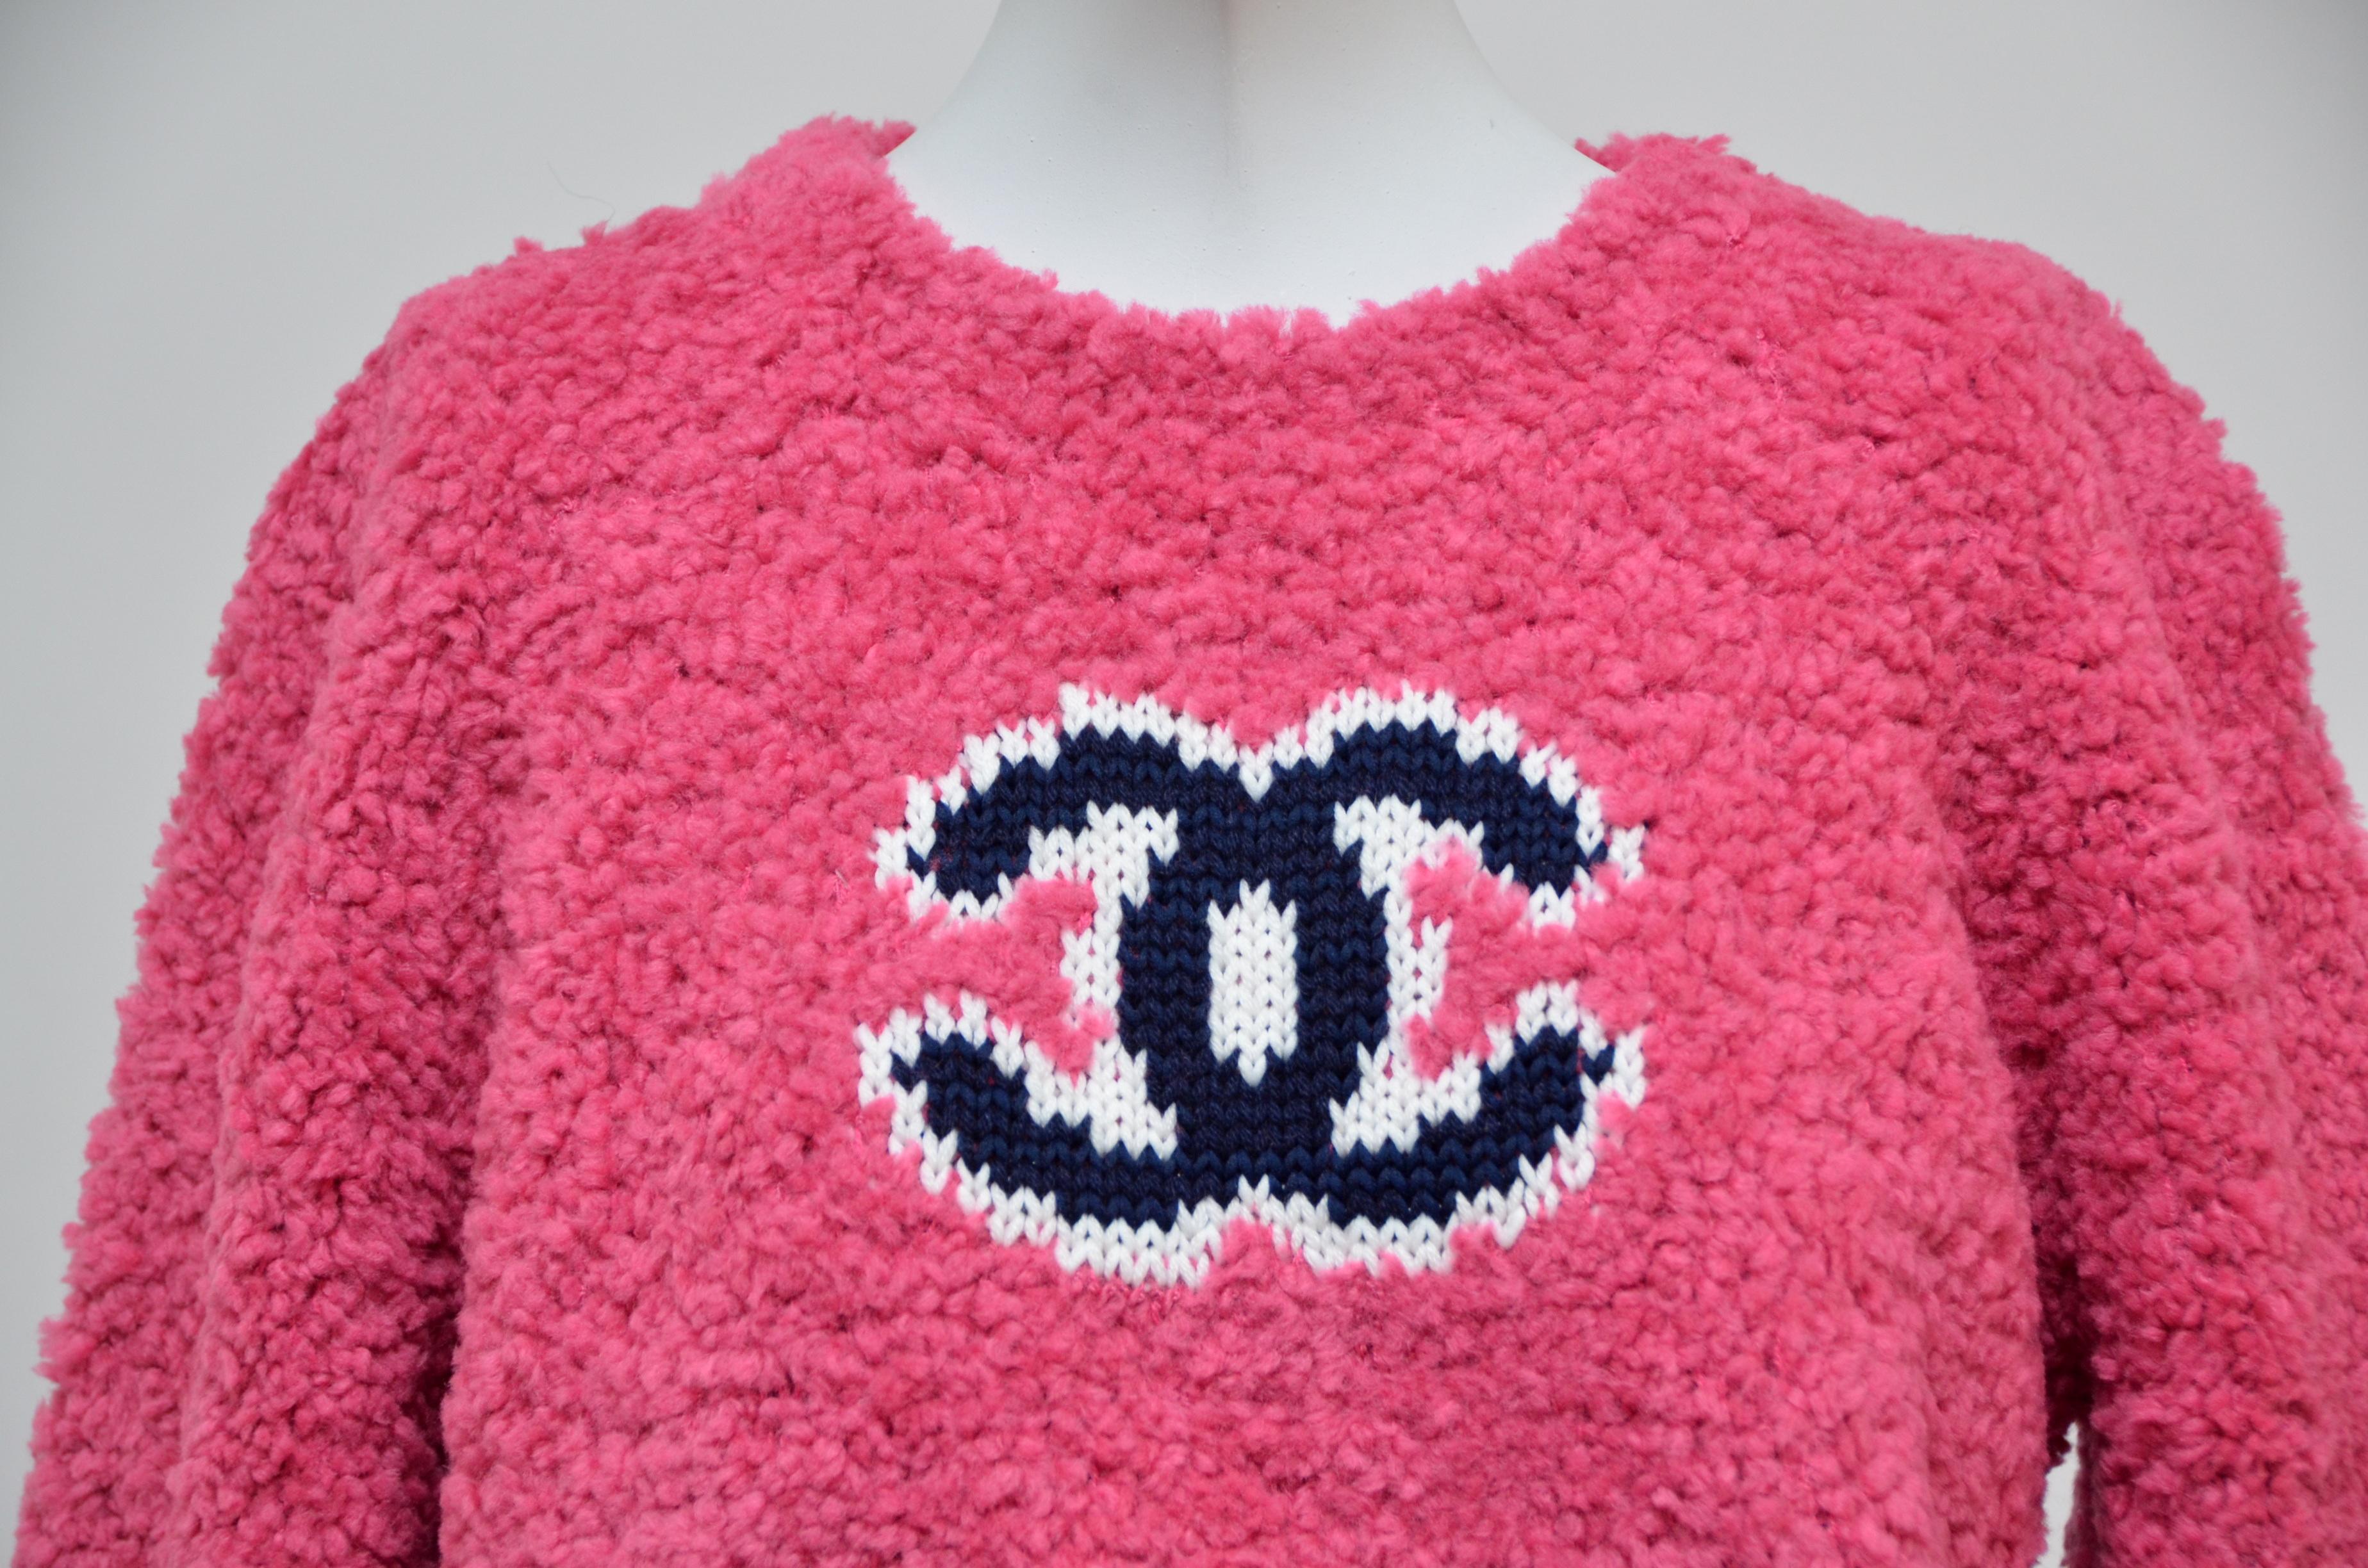 100% authentic Chanel guaranteed.
Chanel teddy sweater in pink tone 
Due to flashlight color tone might vary in person.
New with tags.Original receipt with personal info covered is available to purchaser upon request
Size 40FR.
Please familiarize